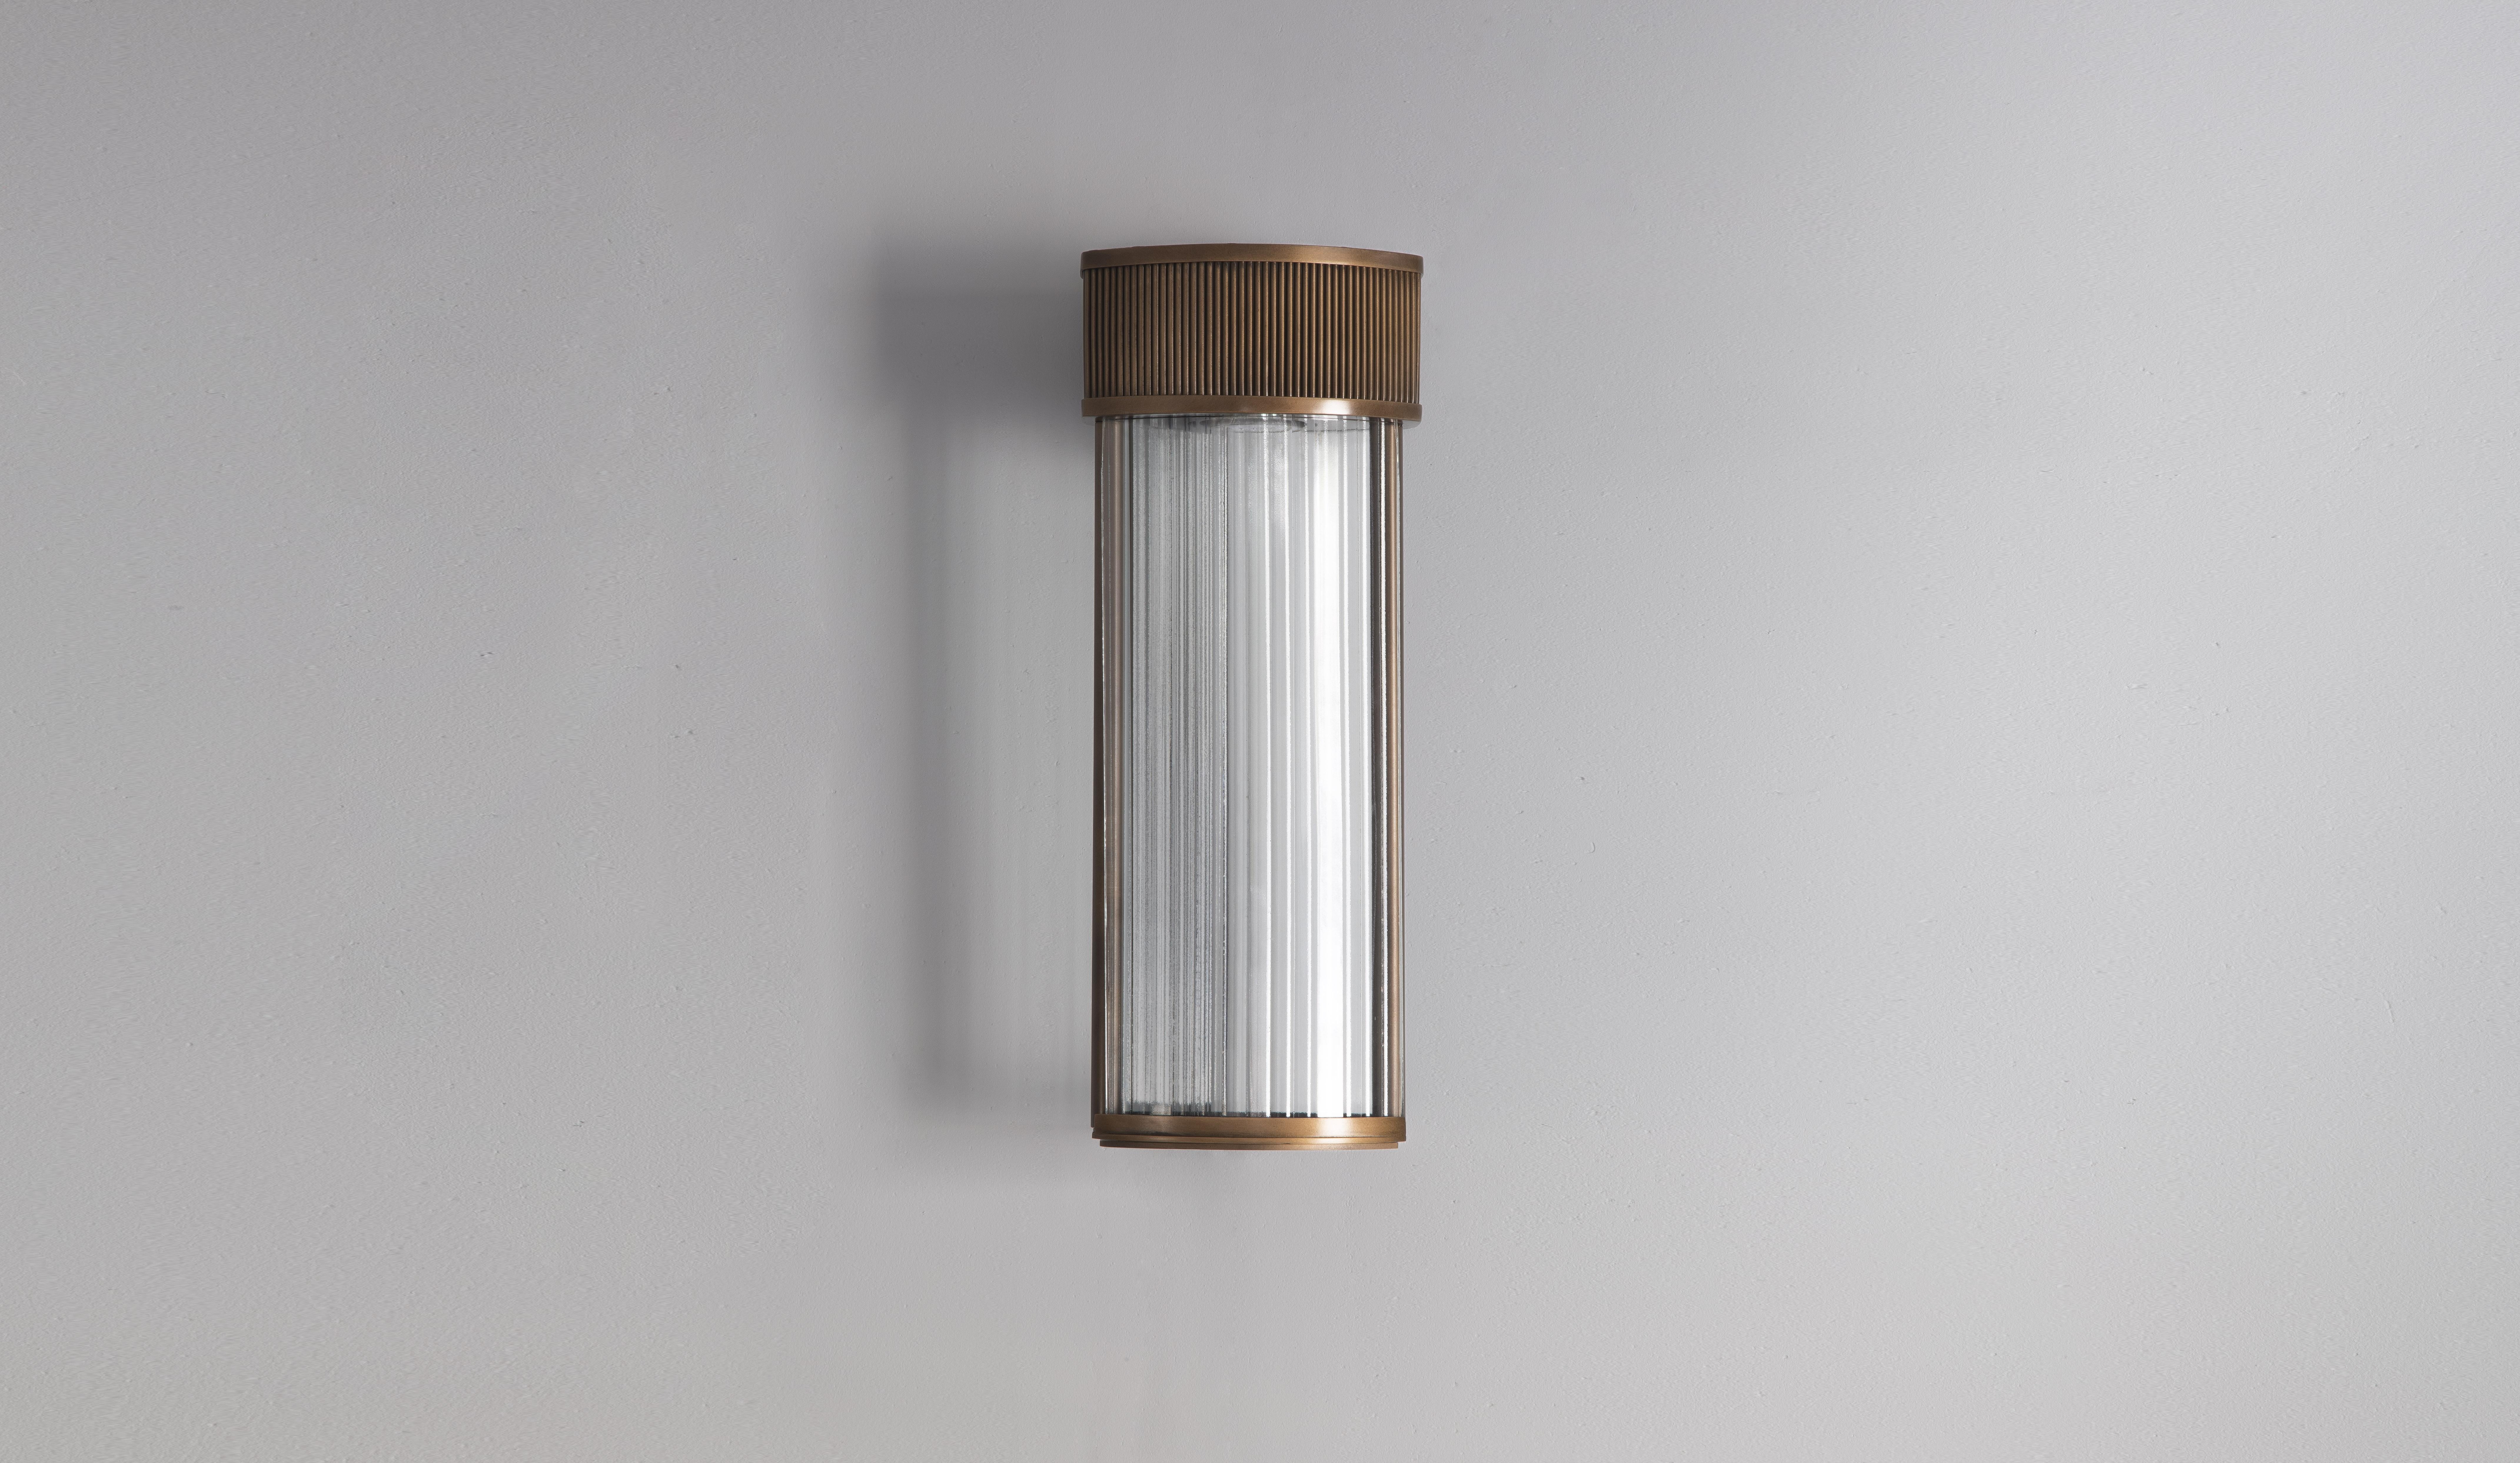 This sophisticated yet minimal Art Deco style wall light is a beautiful combination of bronzed brass and riffled glass. Modern yet timeless. Distinctive in its style and use of clean geometric forms. Inspired by architecture. This lighting fixture